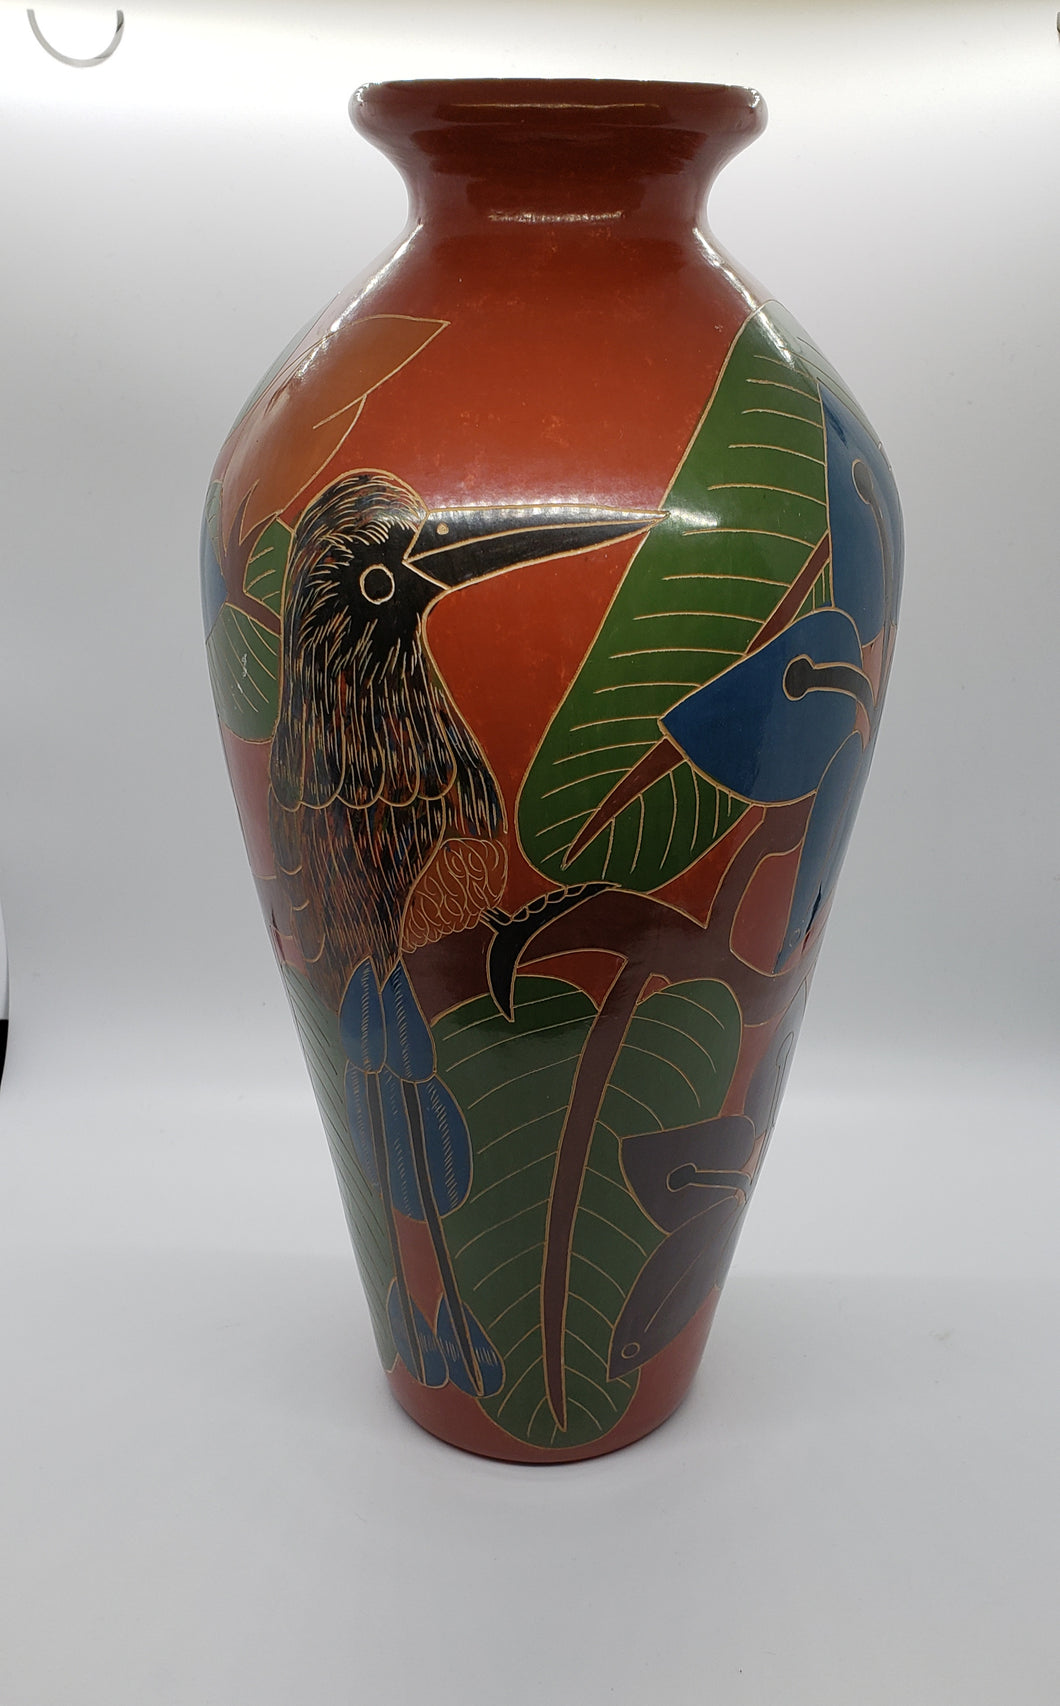 Decorative Vases from Nicaragua